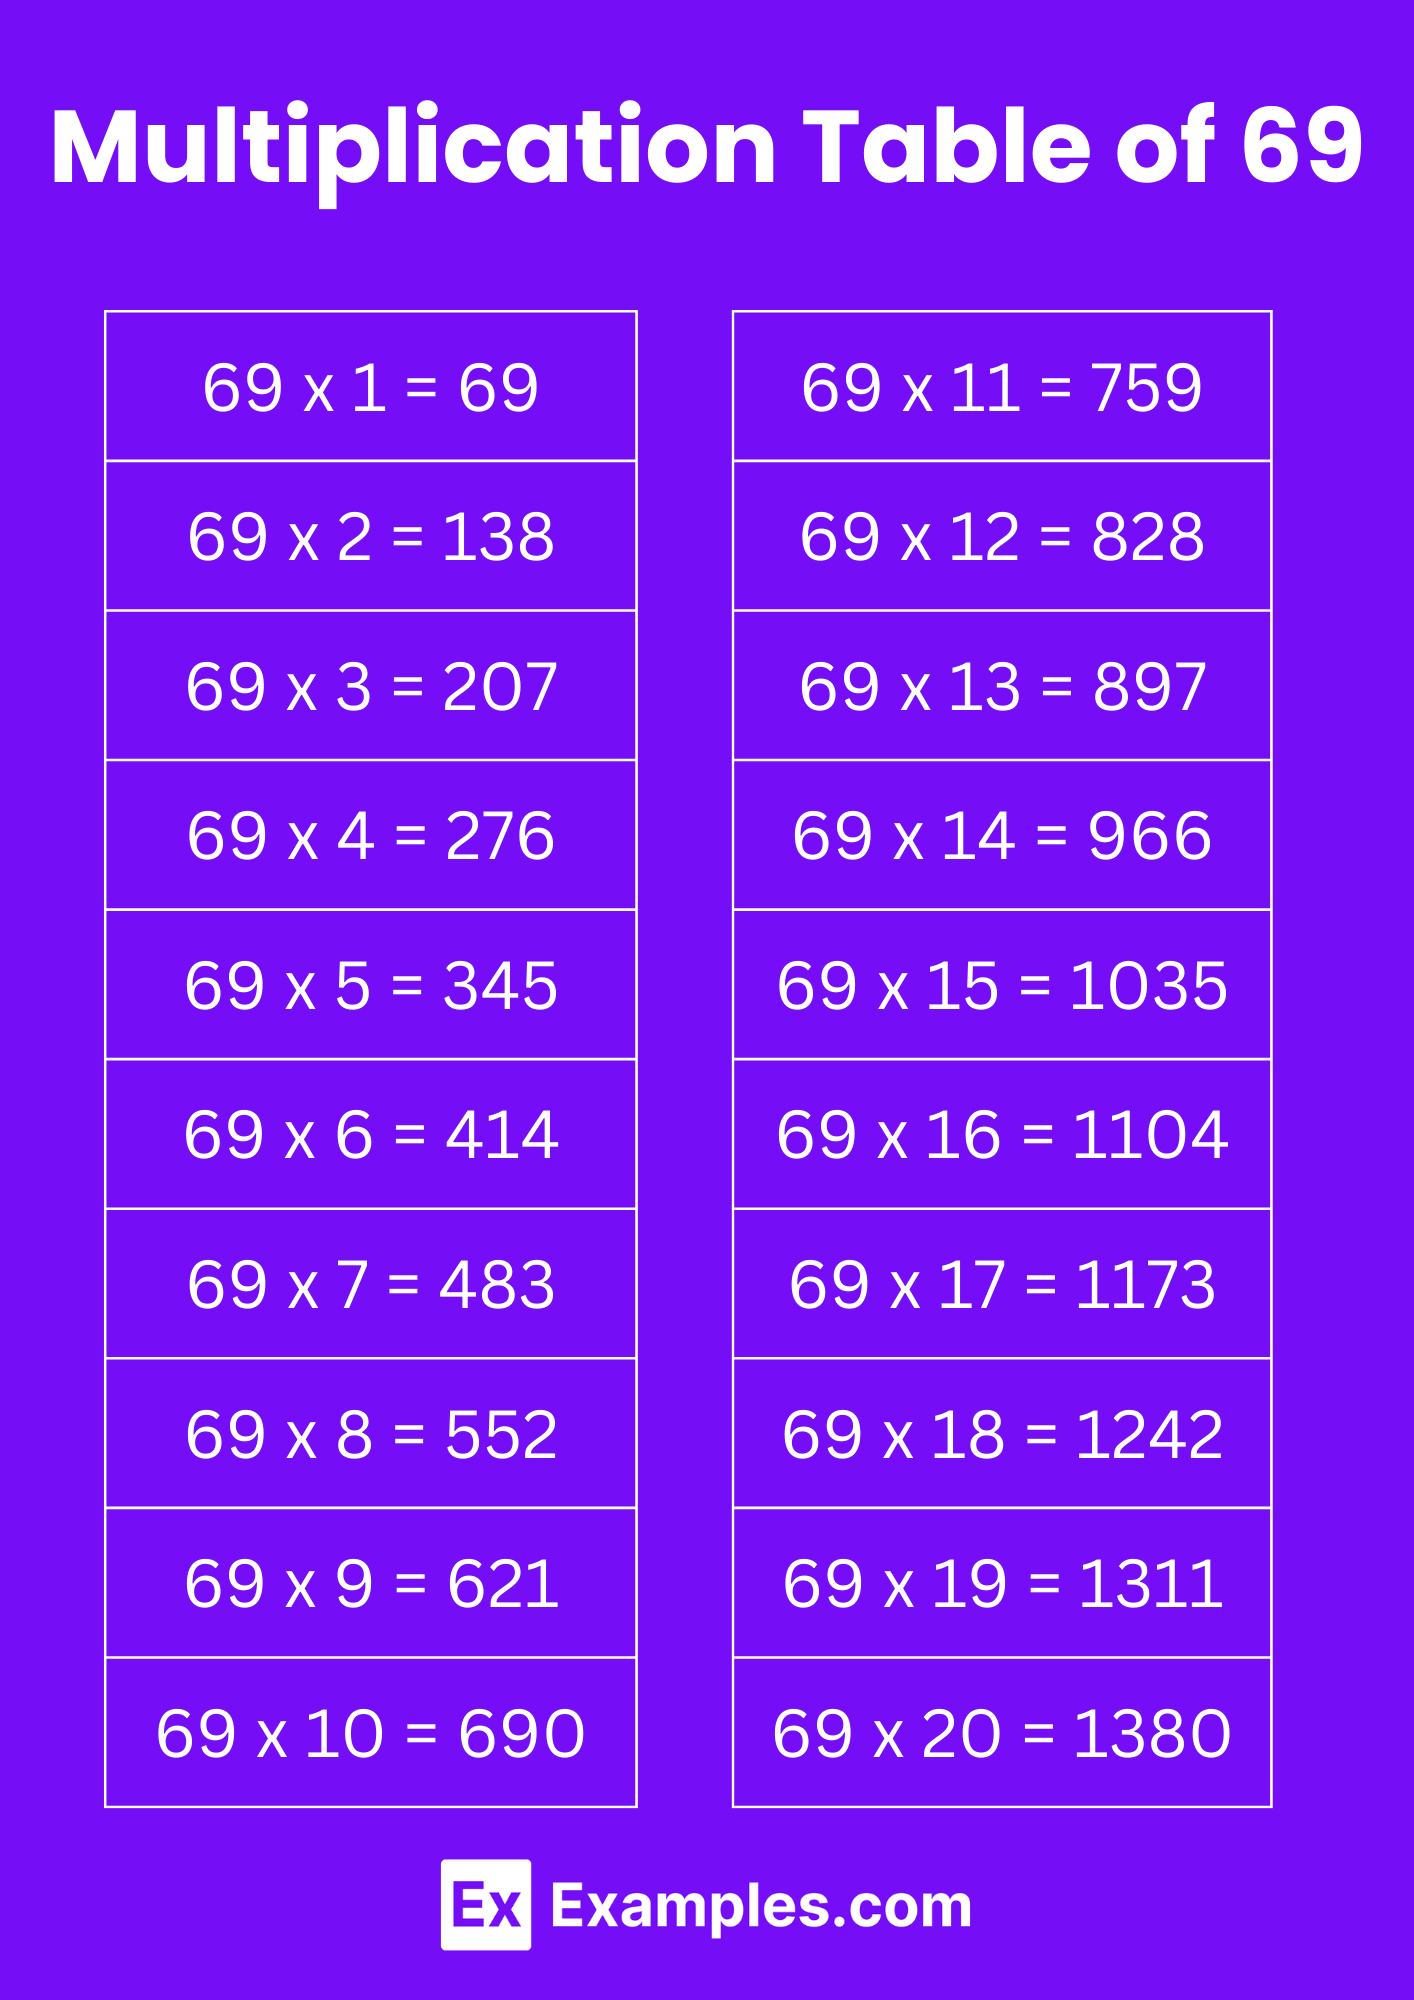 Multiplication Table of 69